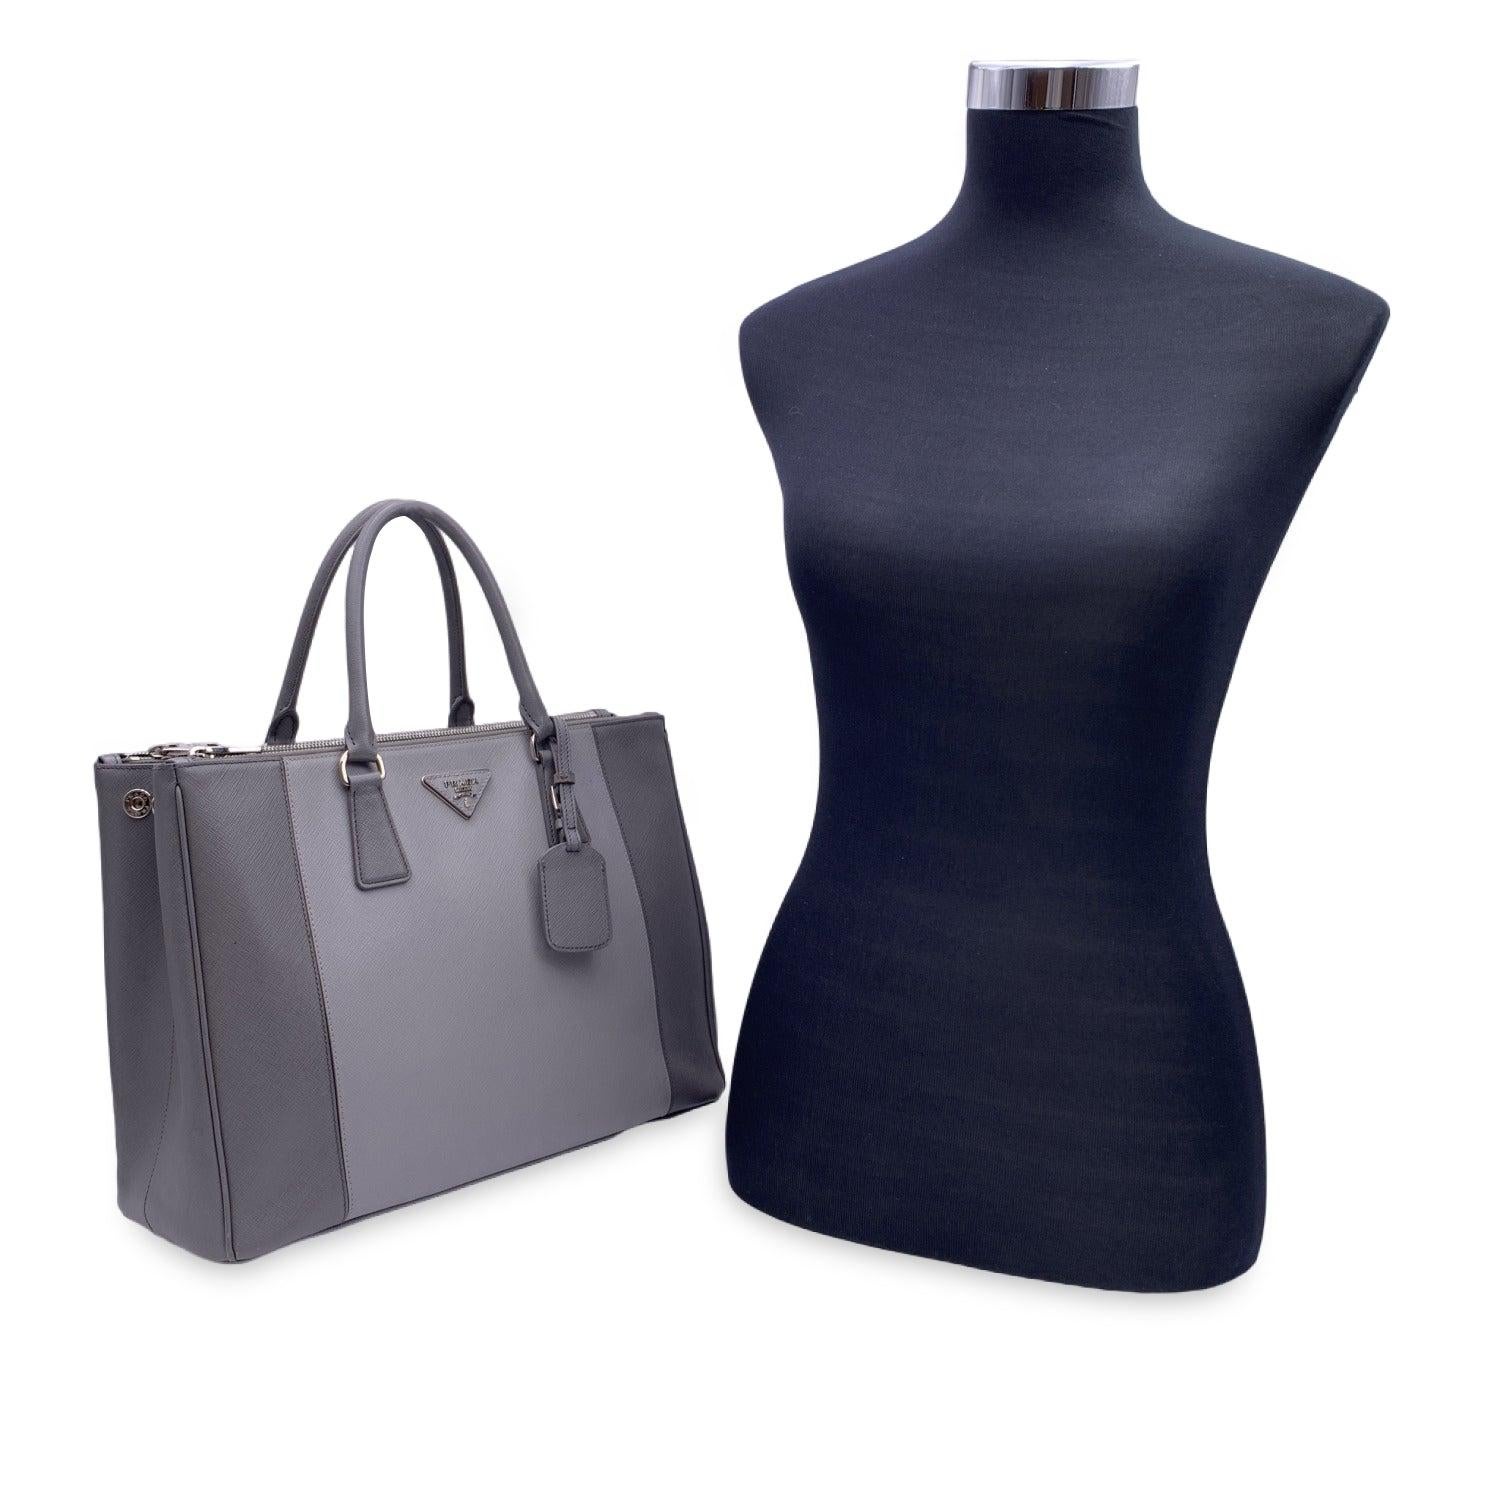 This beautiful Bag will come with a Certificate of Authenticity provided by Entrupy. The certificate will be provided at no further cost Stunning PRADA top handles bag/handbag mod. 'Galleria', designed in different shades of grey Saffiano leather